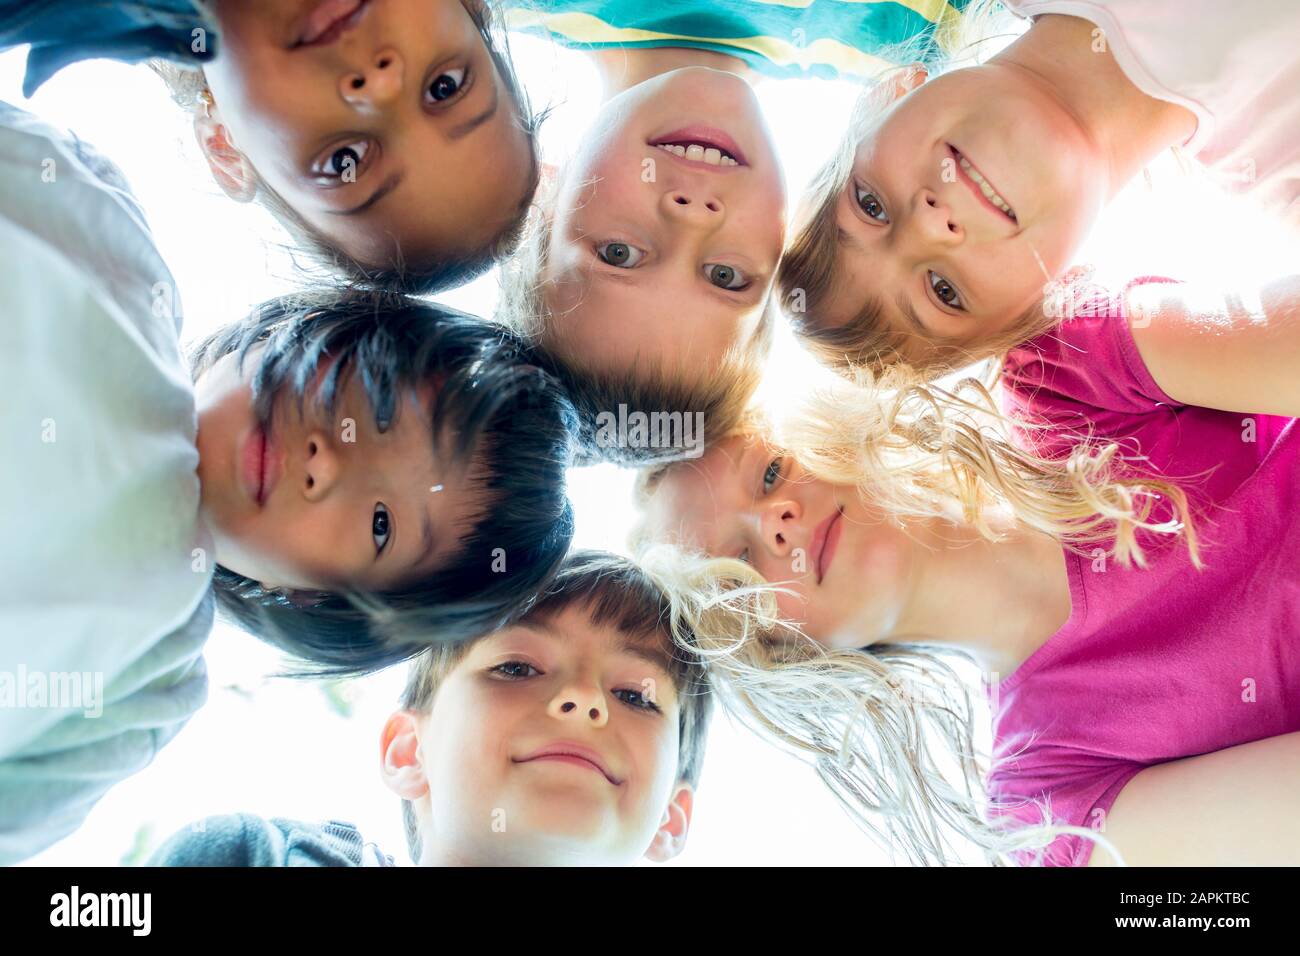 Group of children, sticking heads together, upward view Stock Photo